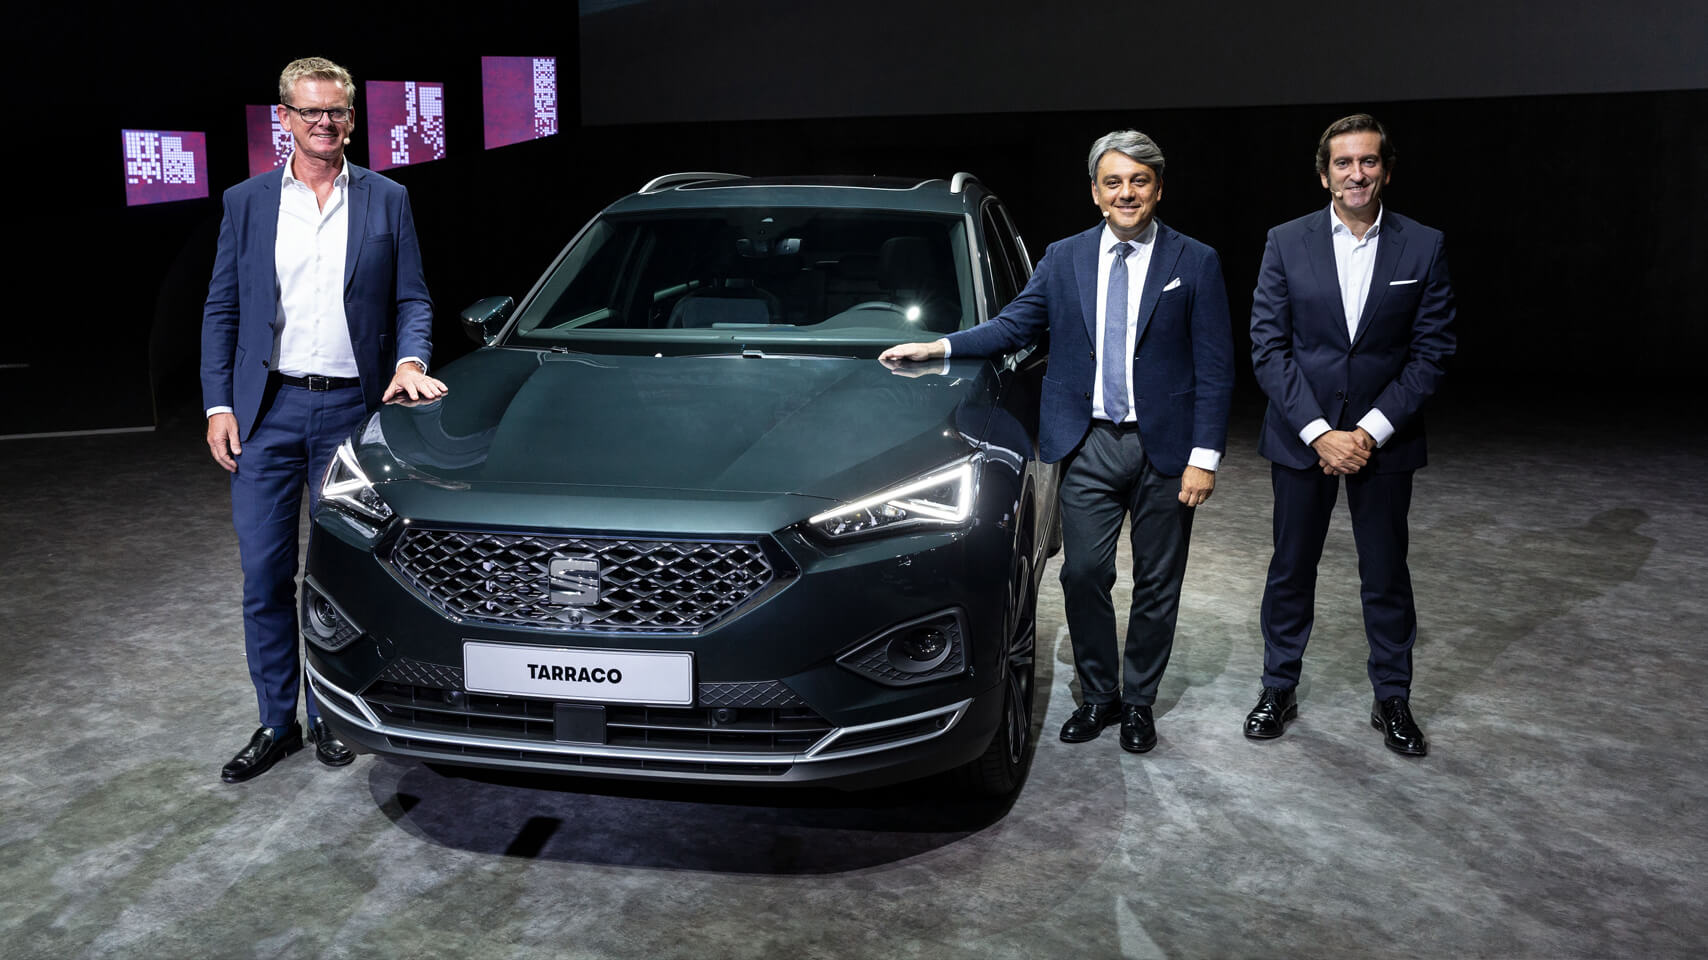 Sales records, CUPRA, new models: Amazing 2018 for SEAT